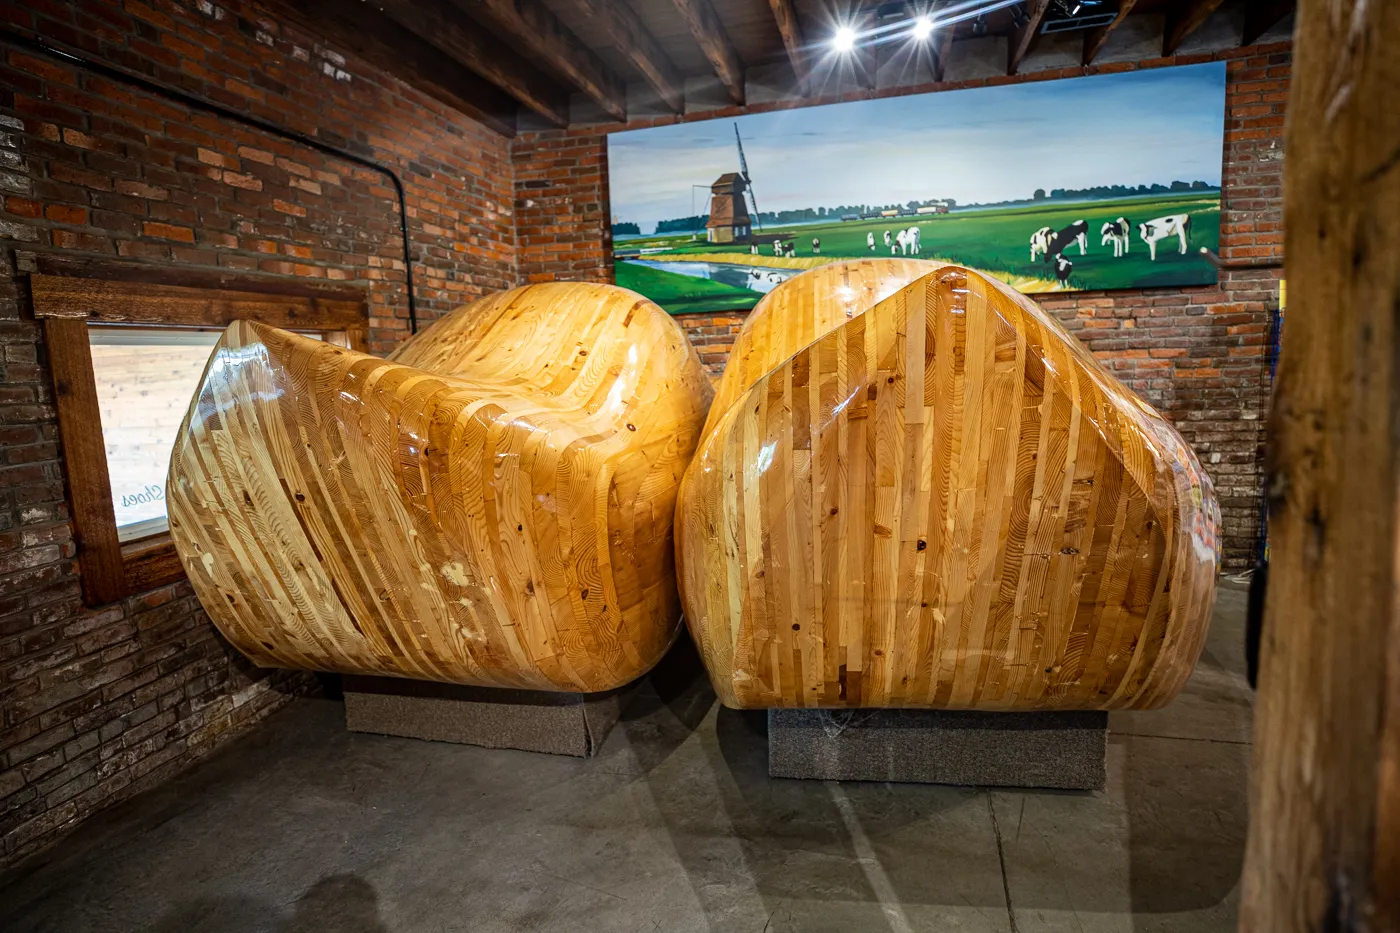 World's Largest Wooden Shoes in Casey, Illinois roadside attraction